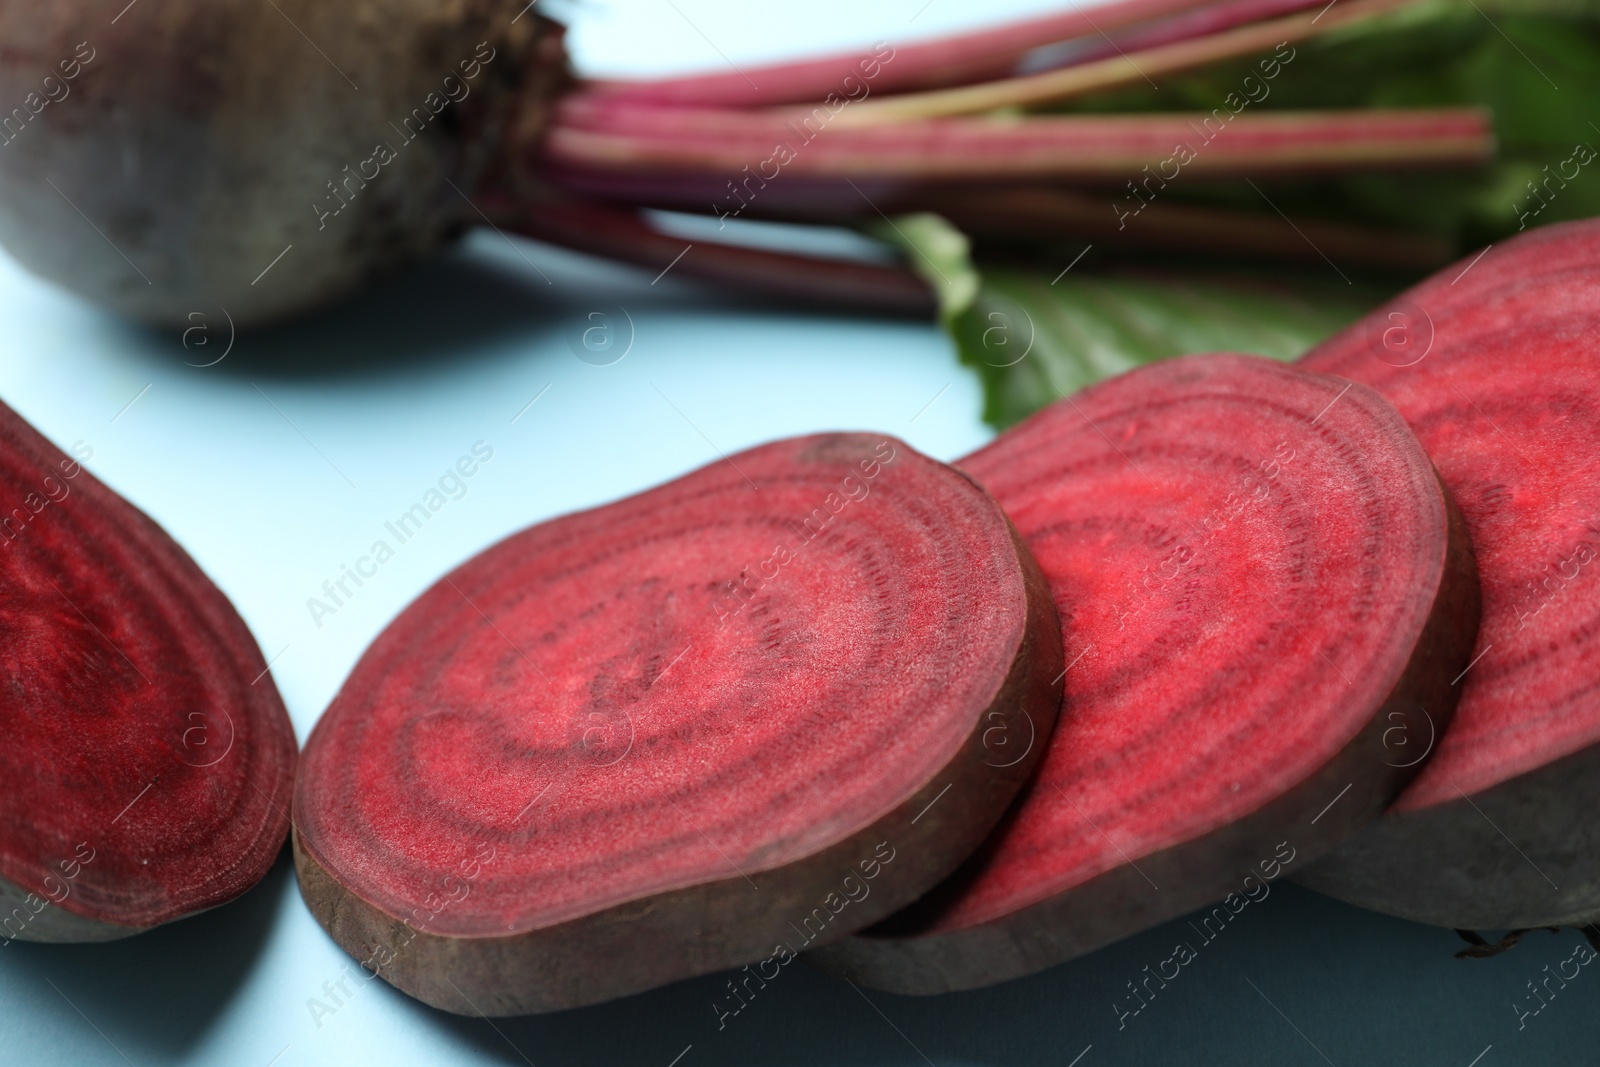 Photo of Whole and cut fresh red beets on light blue background, closeup